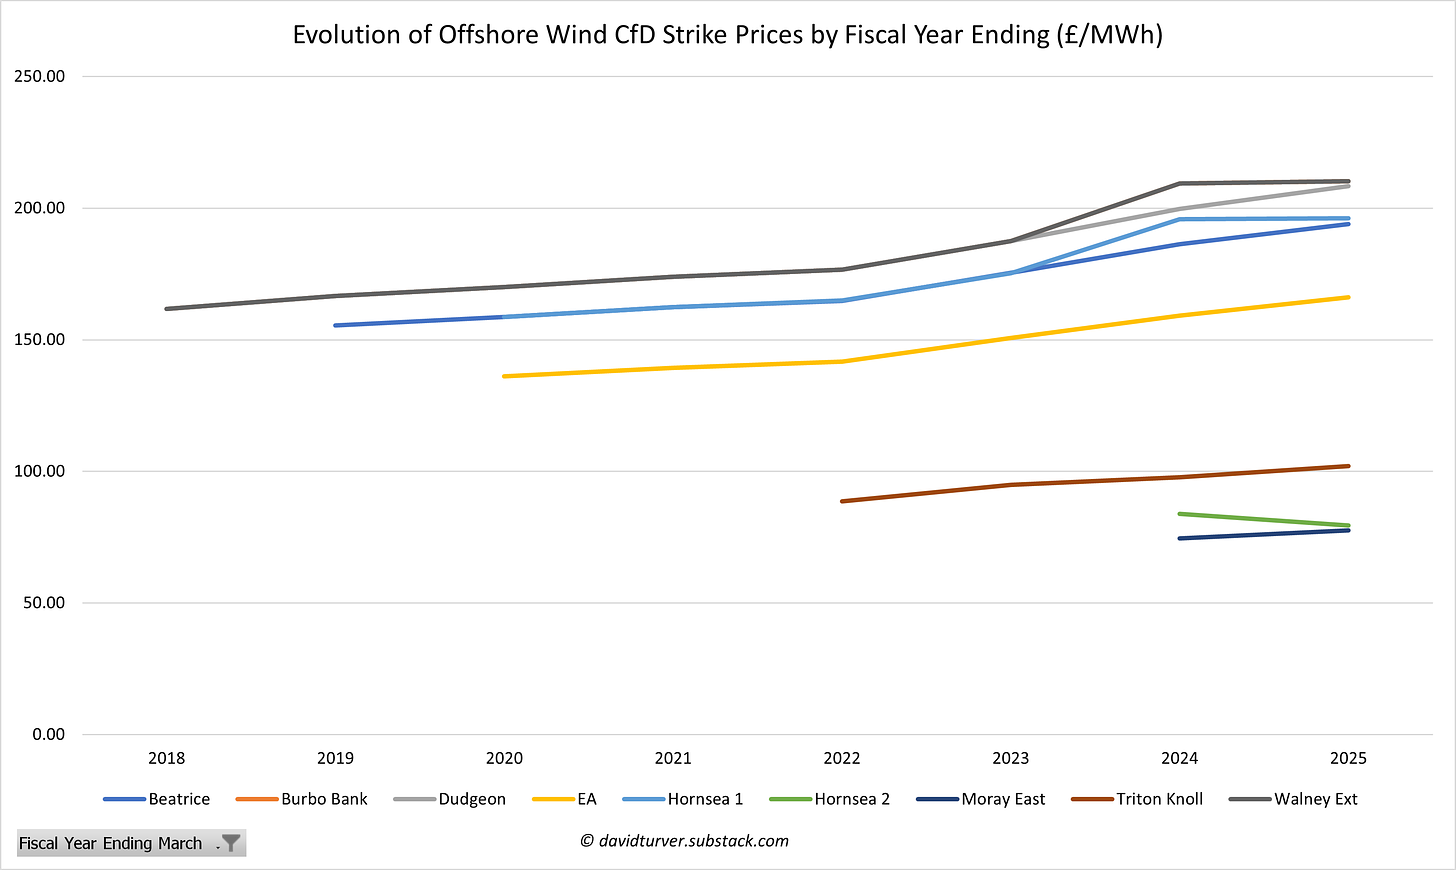 Figure 1 - Evolution of Offshore Wind CfD Strike Prices by FInancial Year Ended March (£ per MWh)